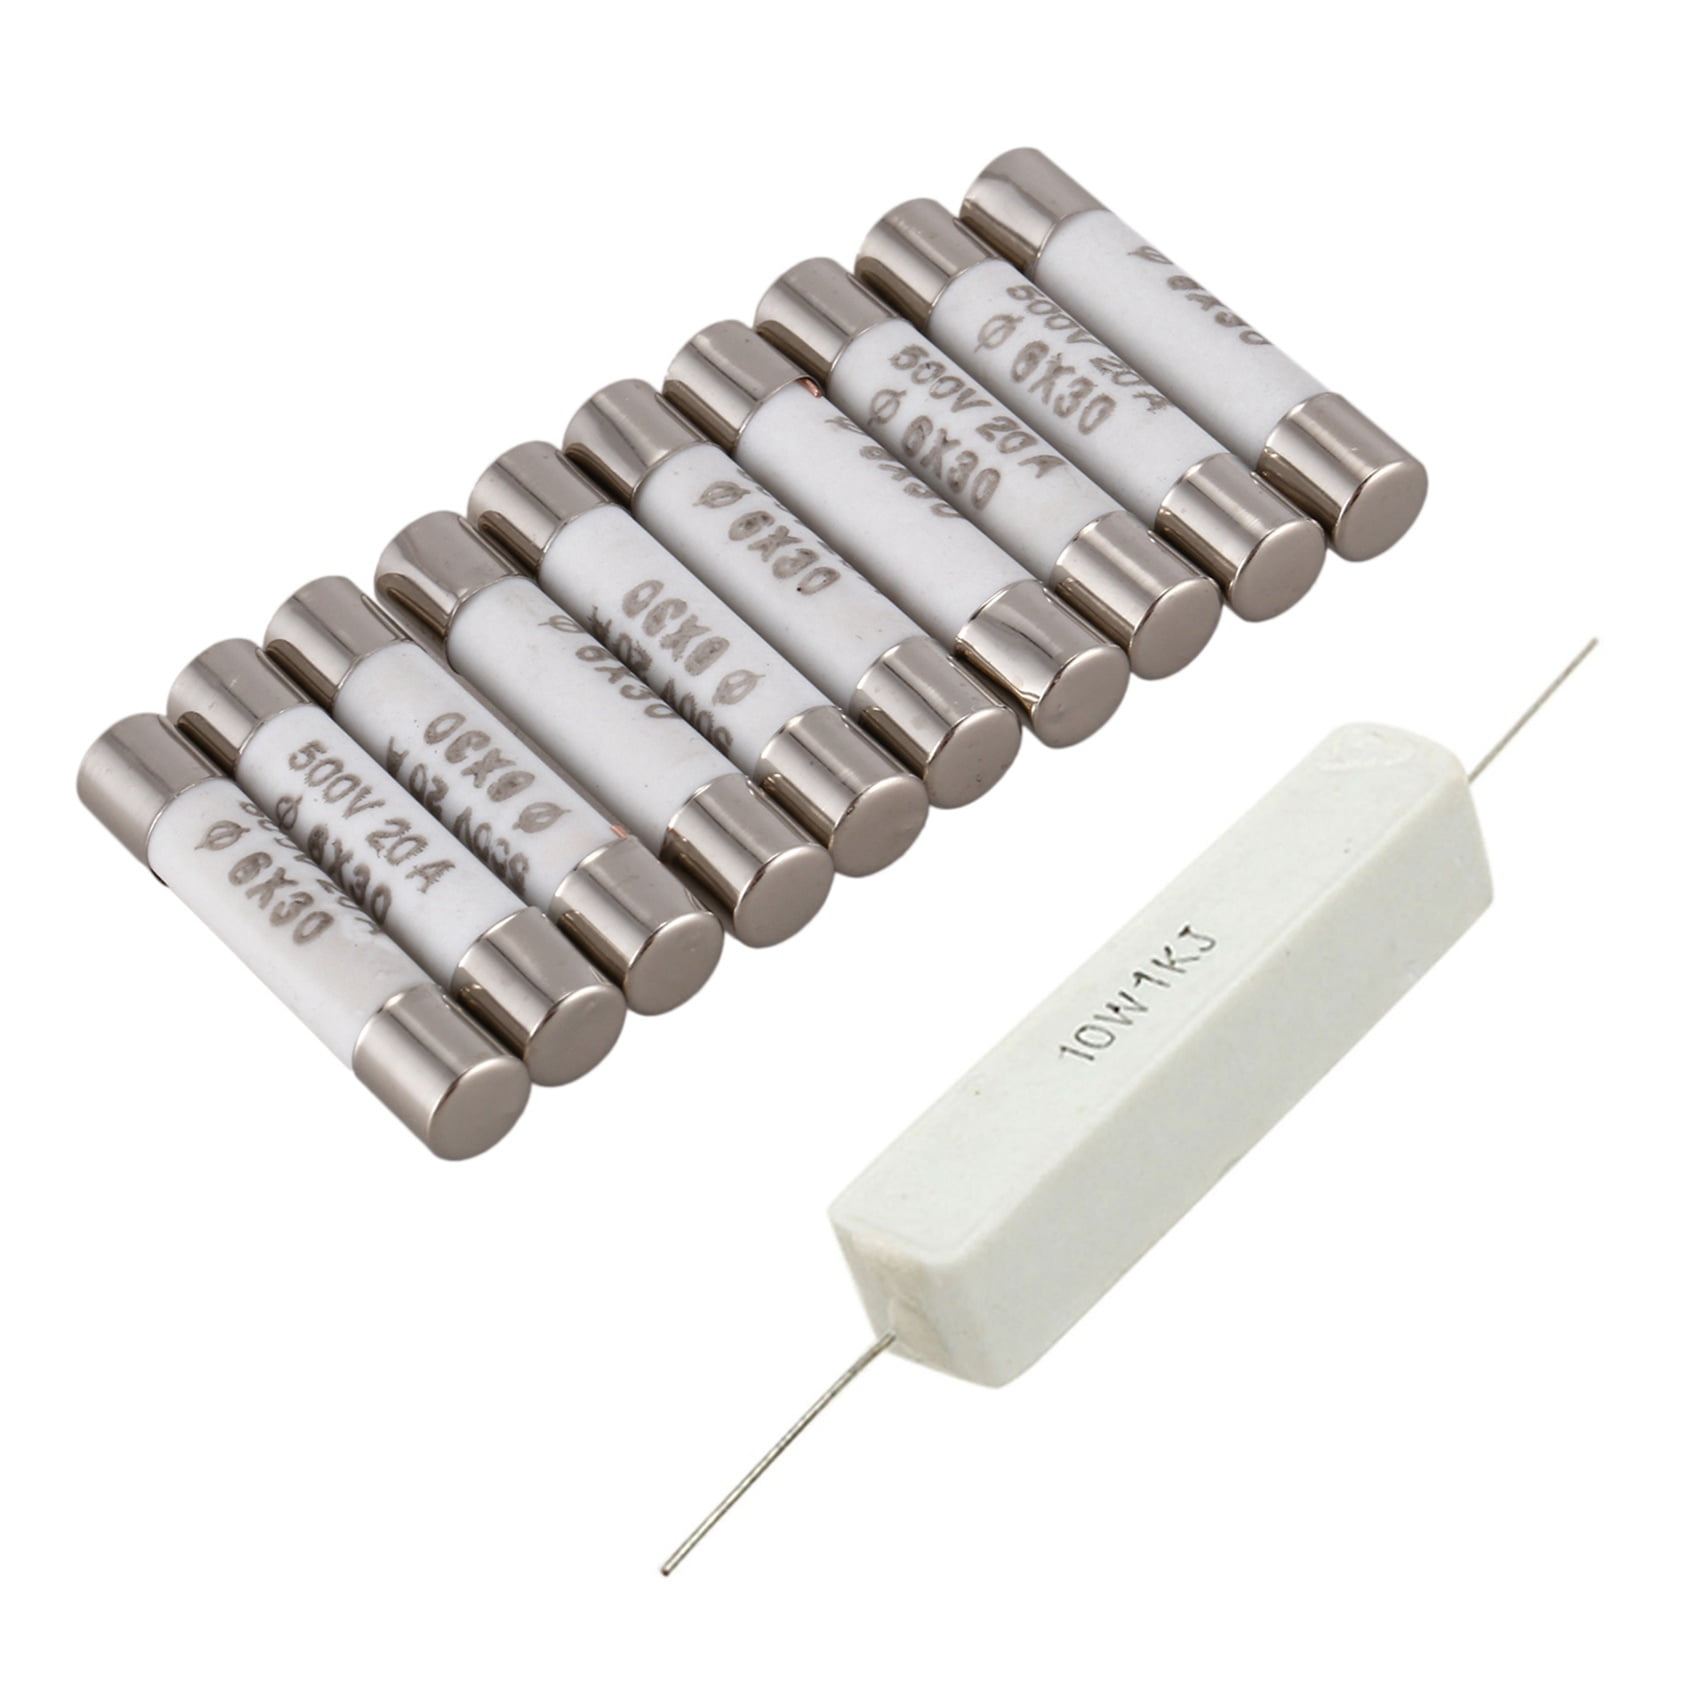 uxcell 5W 22 Ohm Power Resistor Ceramic Cement Resistor Axial Lead 15 Pcs White 